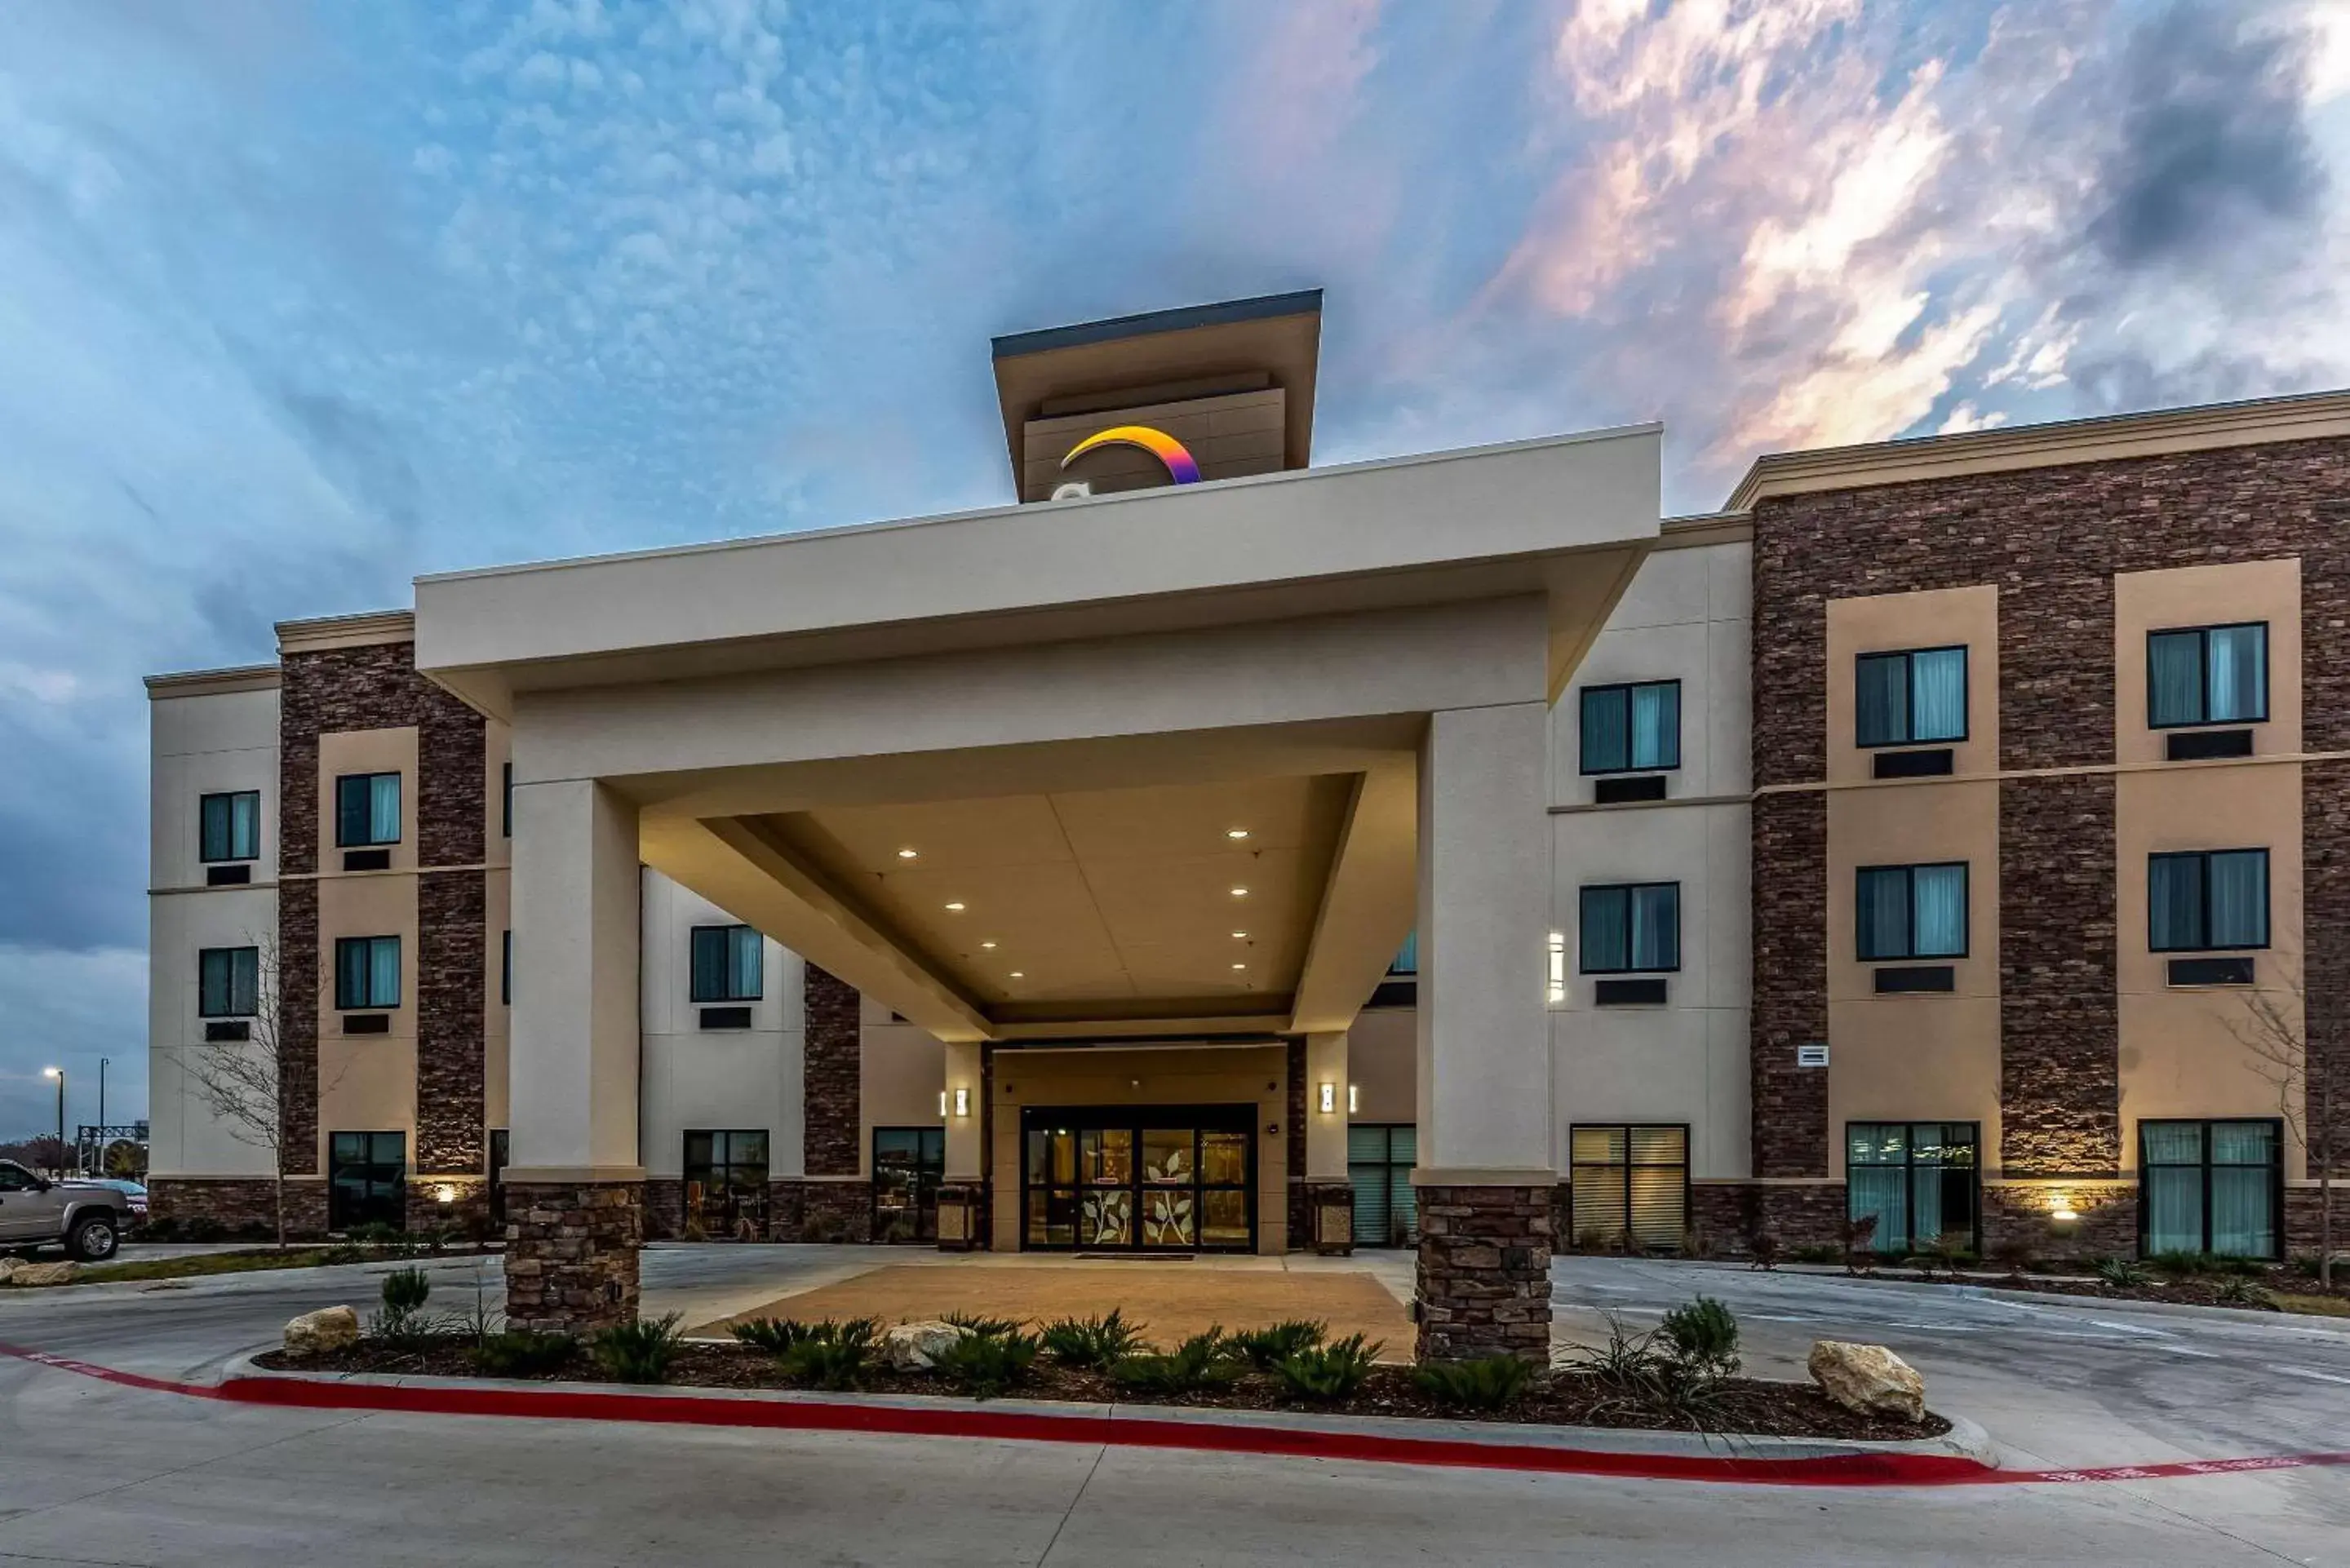 Other, Property Building in Sleep Inn & Suites Fort Worth - Fossil Creek